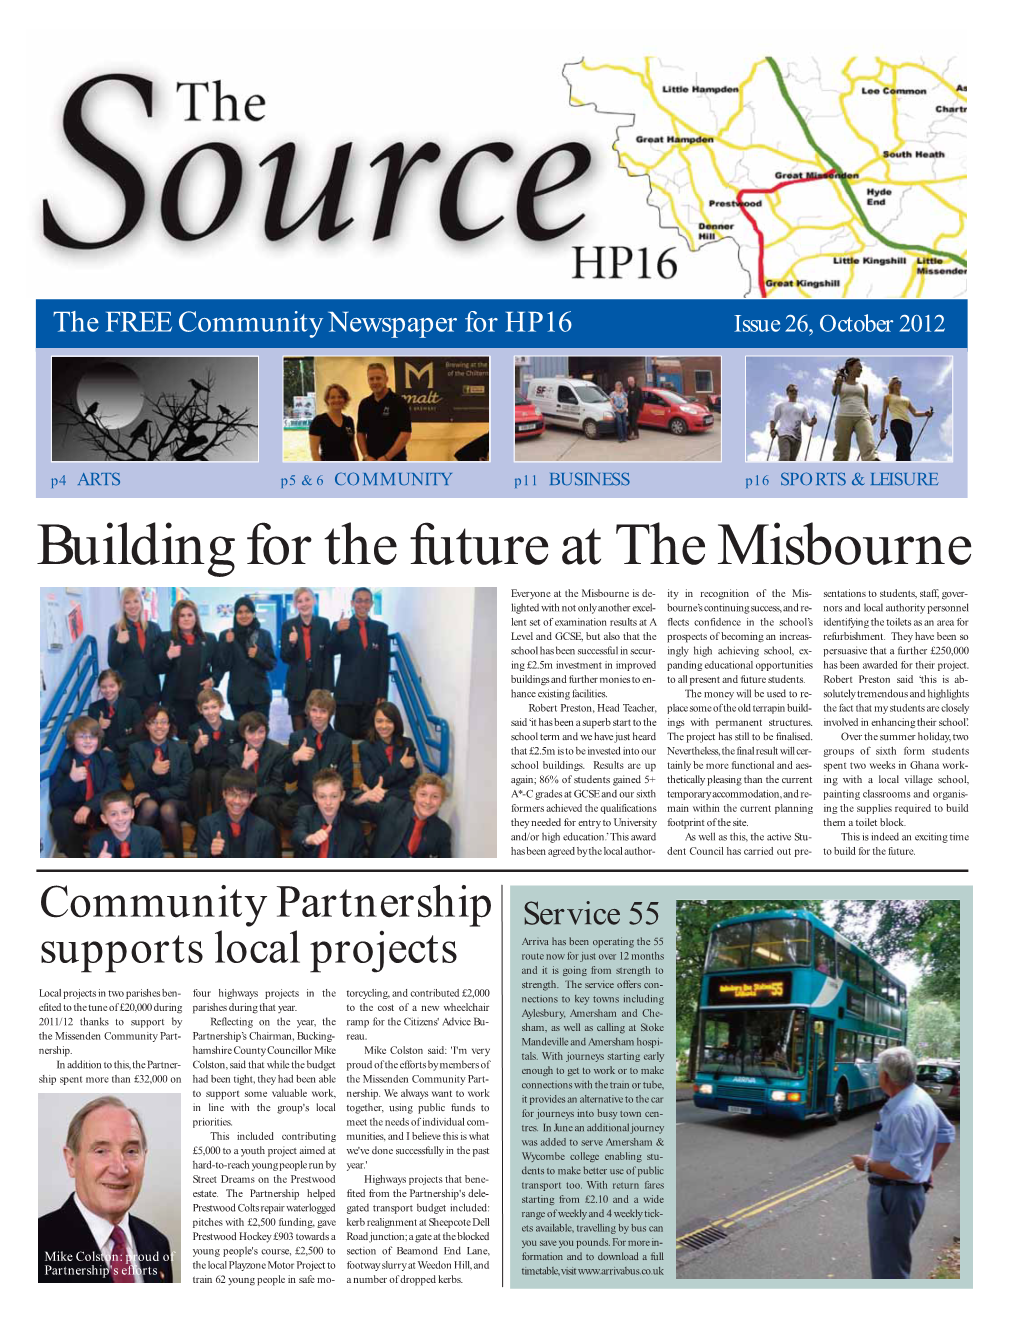 Building for the Future at the Misbourne